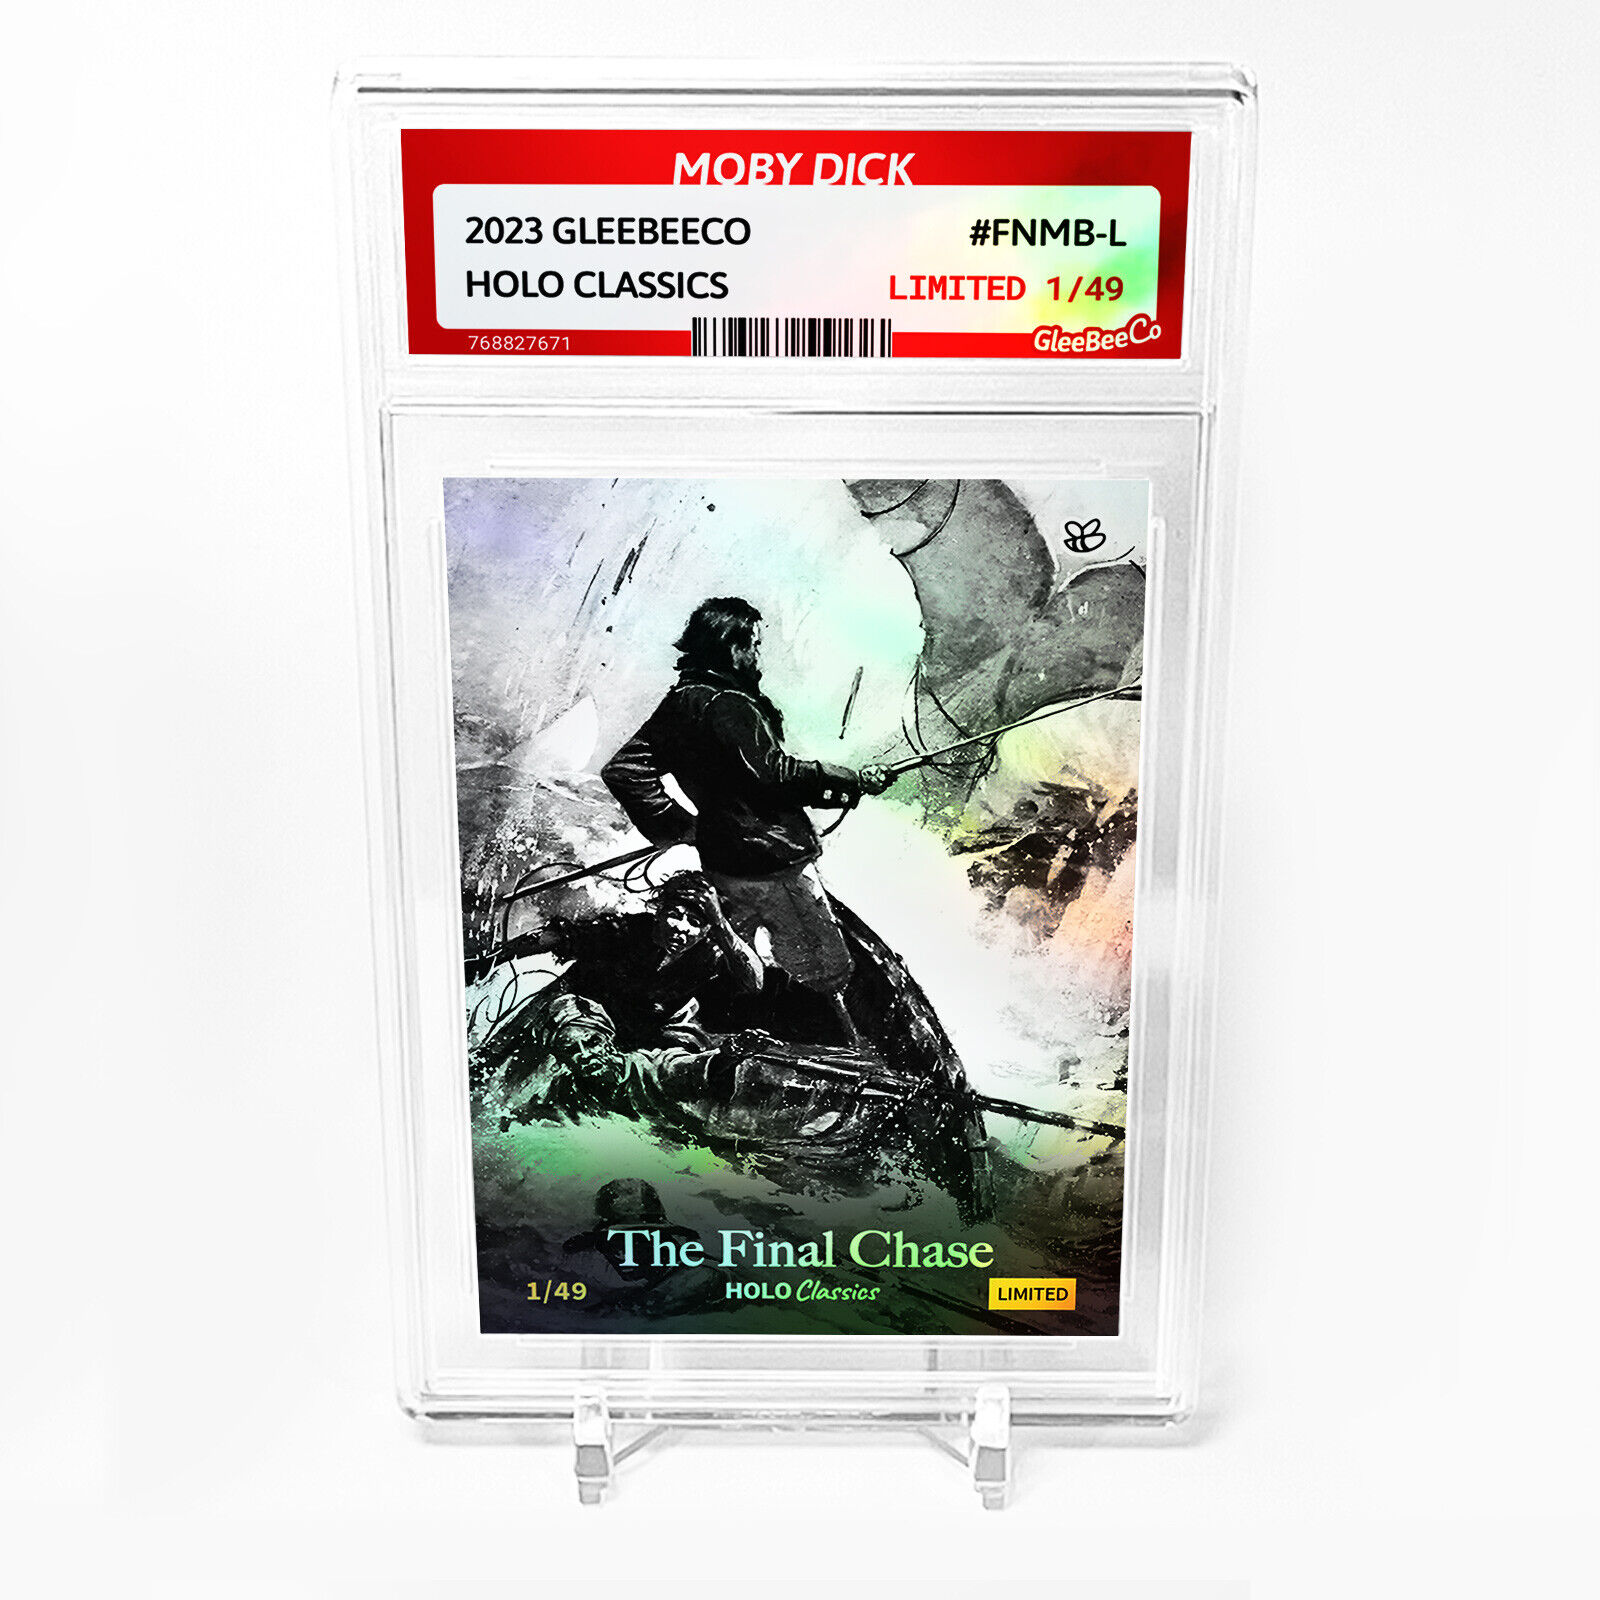 FINAL CHASE Moby Dick 2023 GleeBeeCo Card Holographic #FNMB-L /49